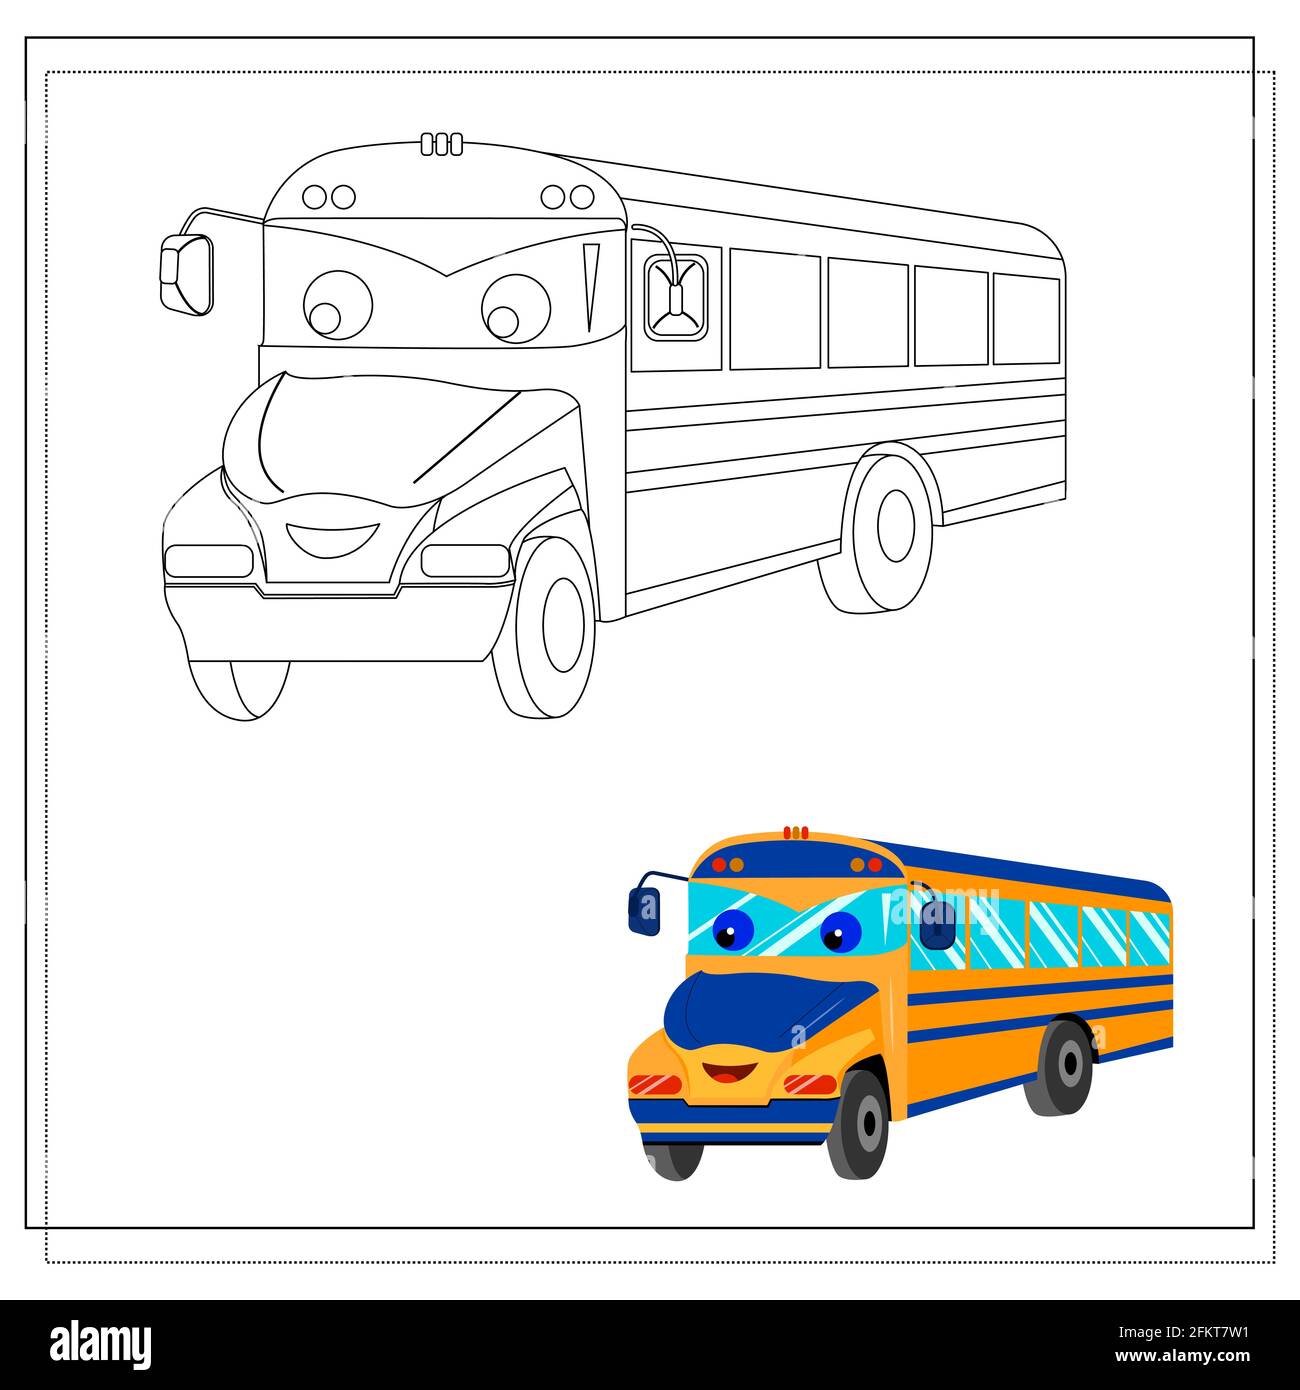 A cartoon school bus coloring book with eyes and a smile sketch and color version vector illustration isolated on a white background stock vector image art